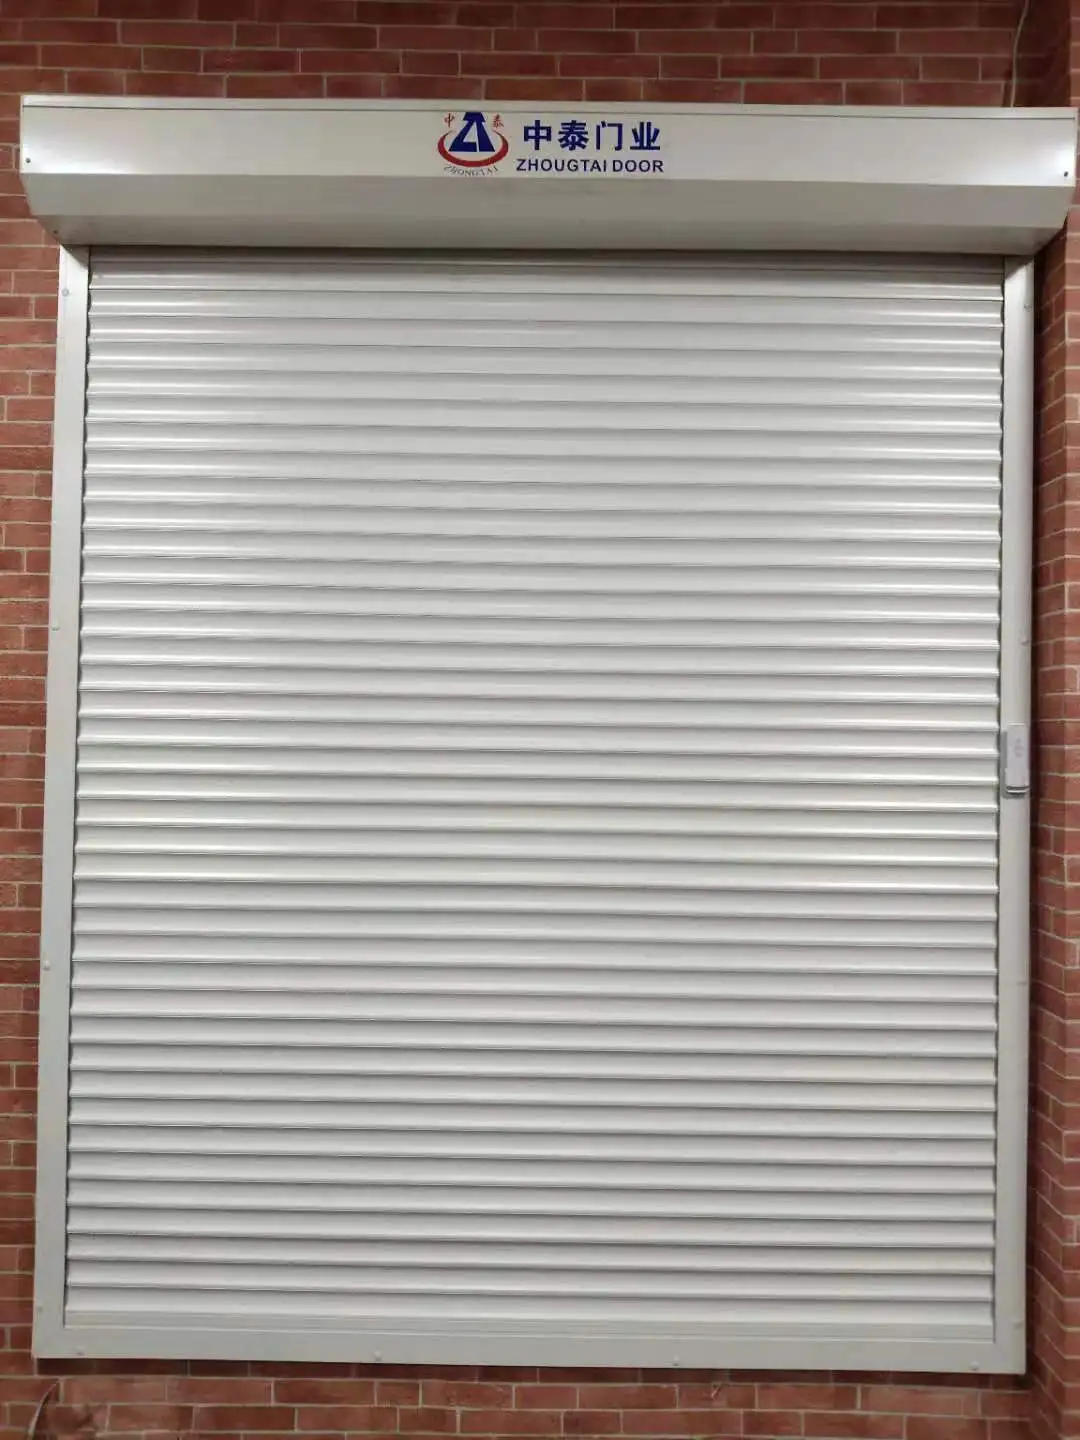 45mm White 1200mm Width and 1600mm Height Aluminum With Polyurethane Material Roller Shutter Windows Ready to Ship